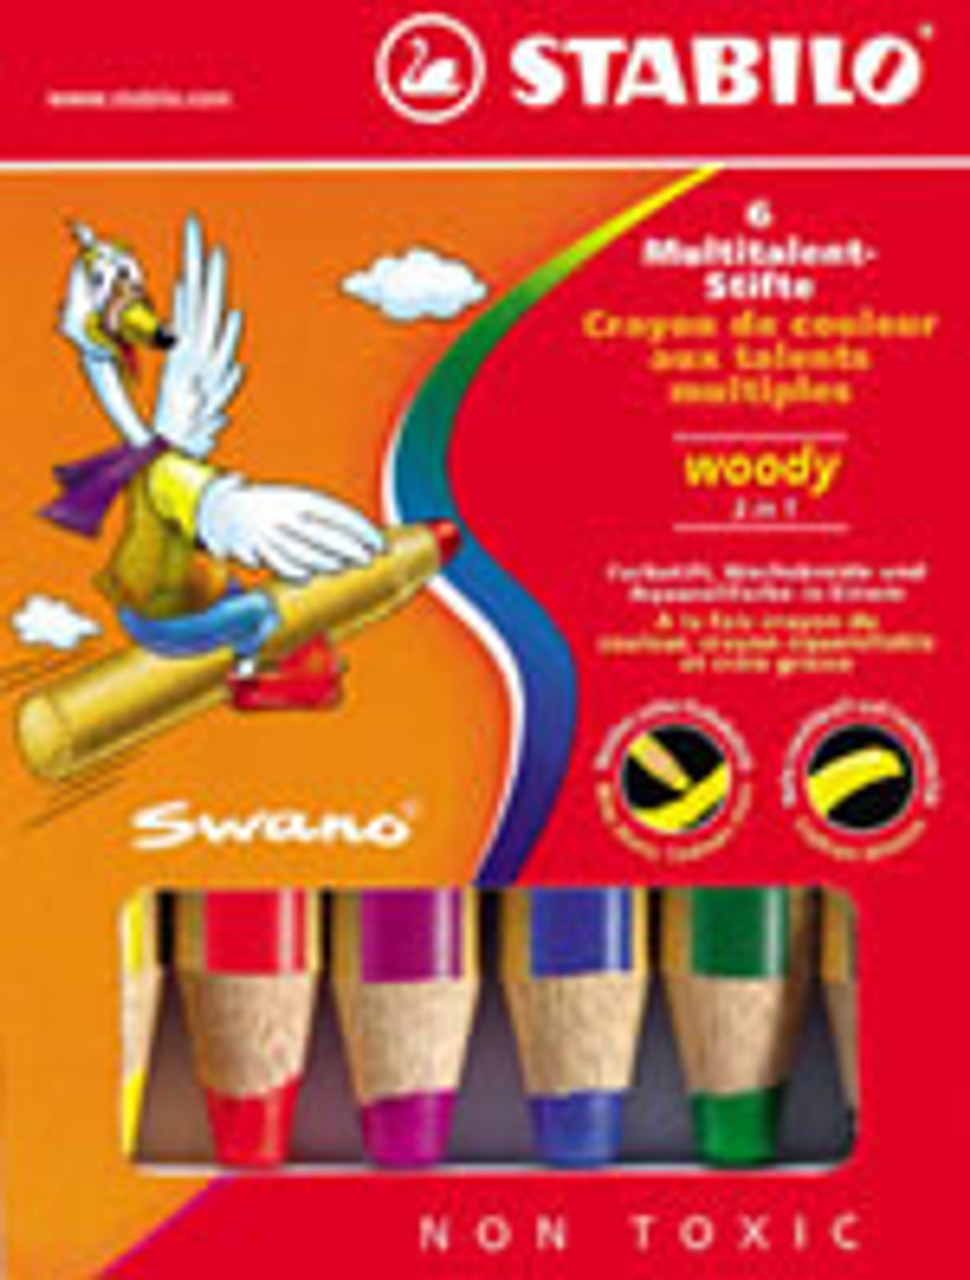 STABILO Woody 3 in 1, Set of 6 with Sharpener